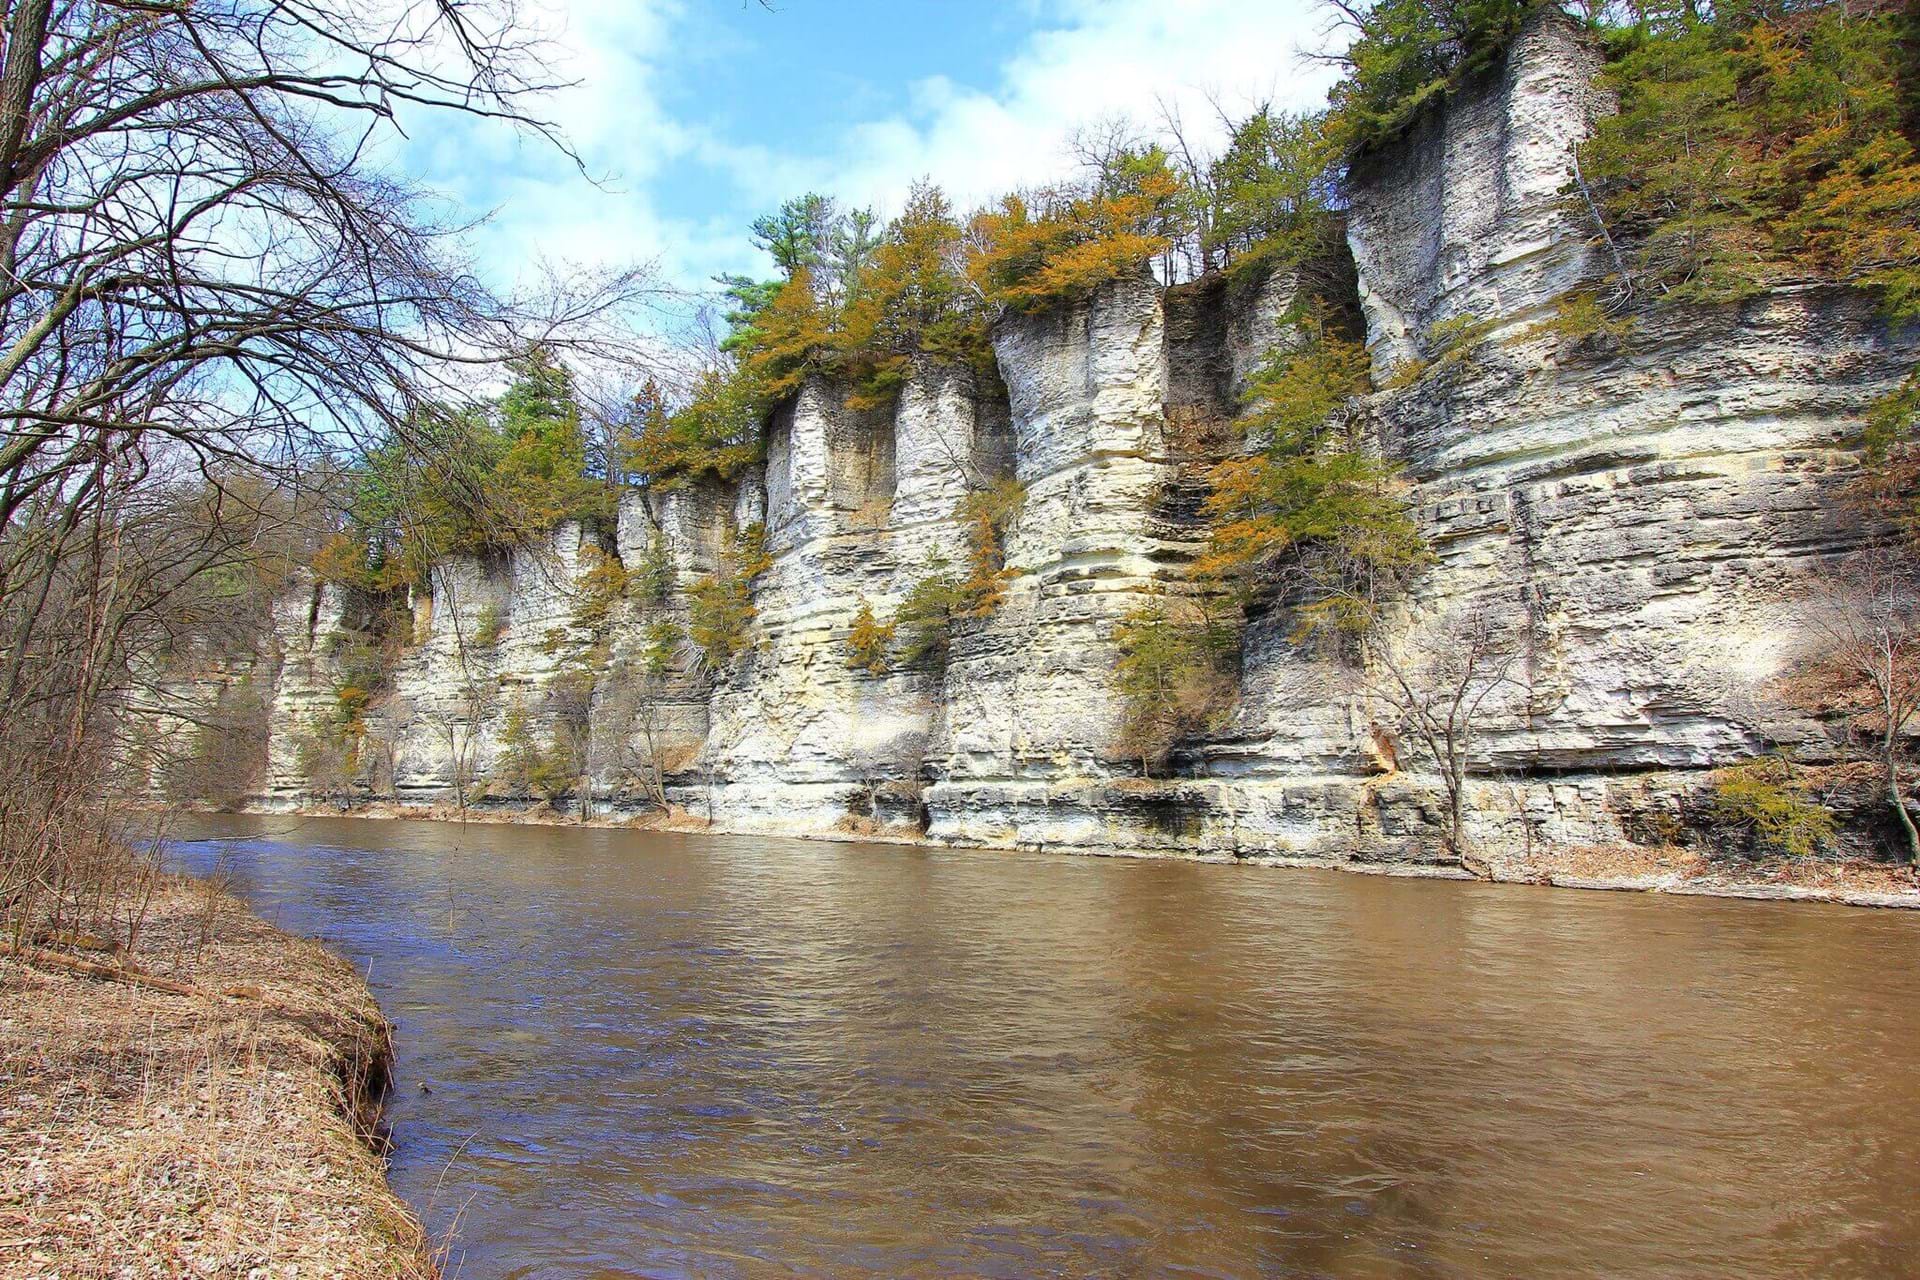 The limestone bluffs of the park overlooking the Upper Iowa river